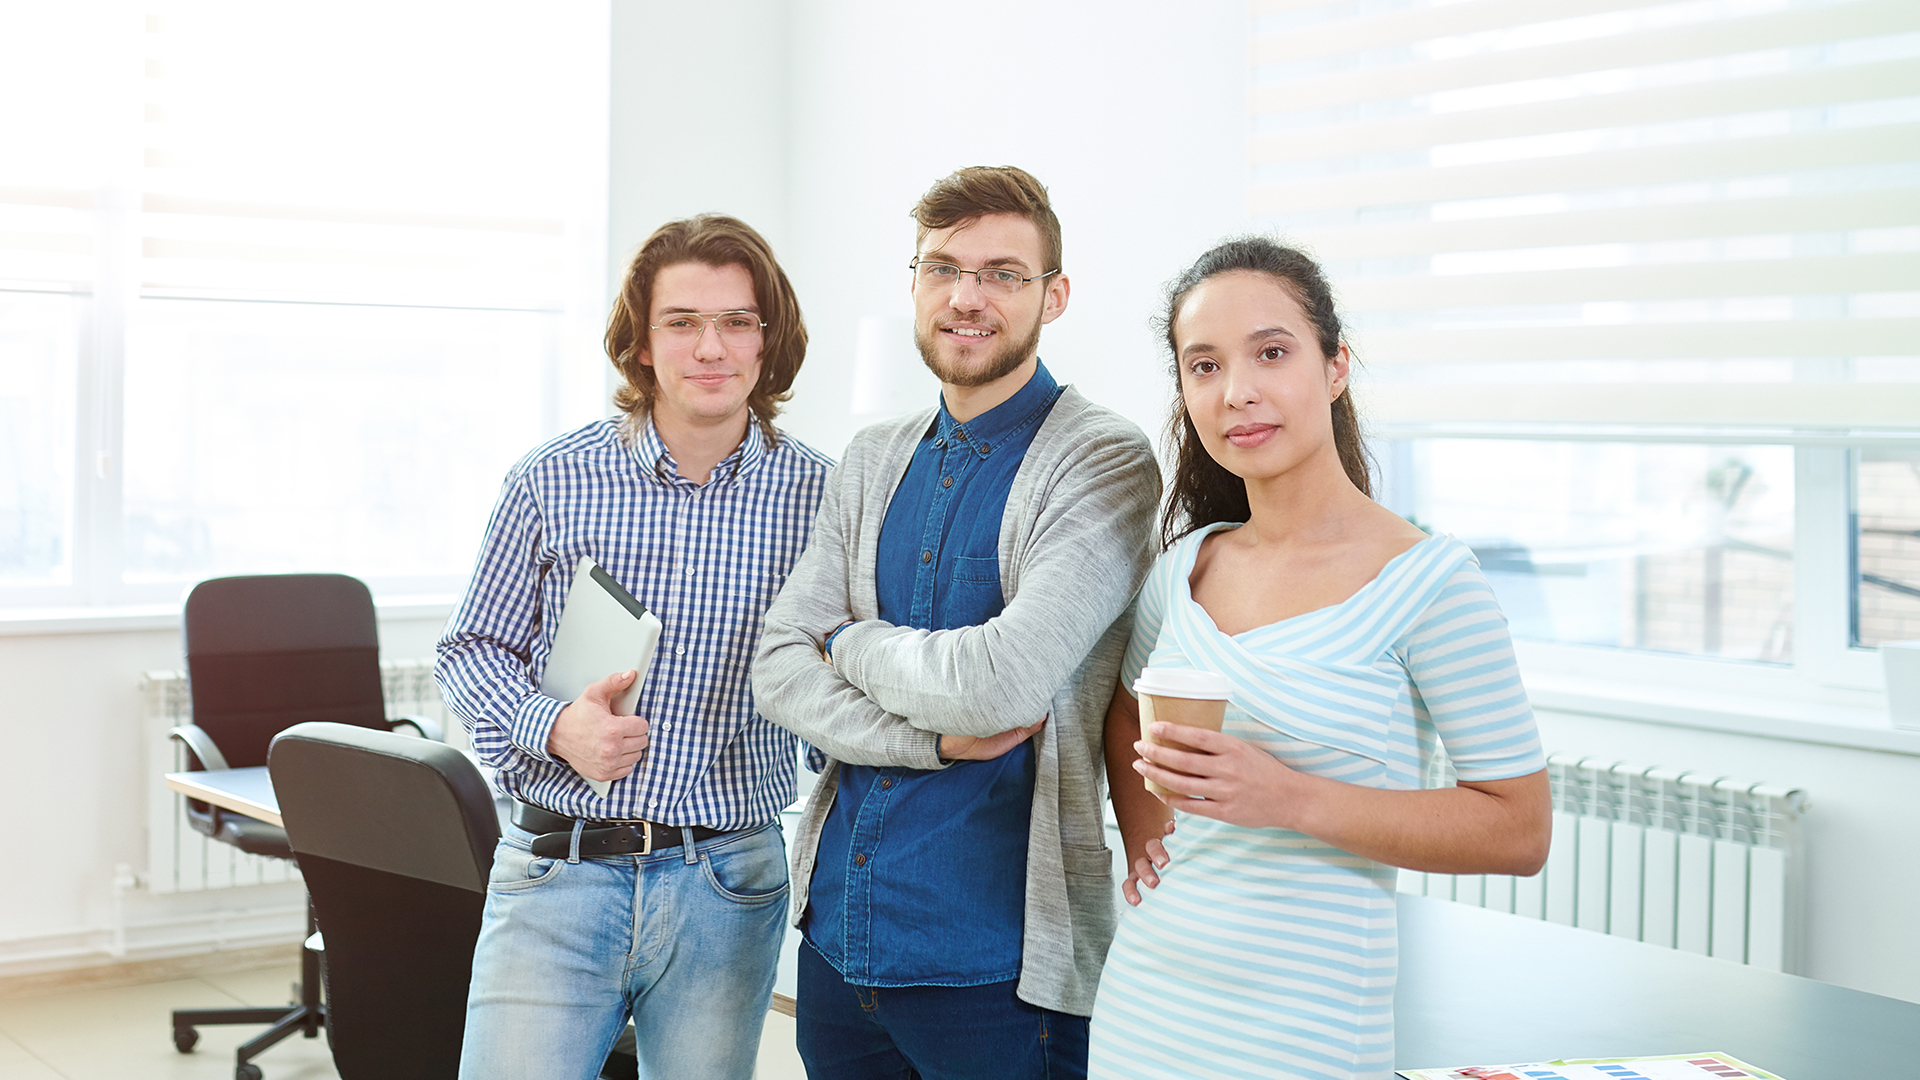 Young employees benefits and safety in the office